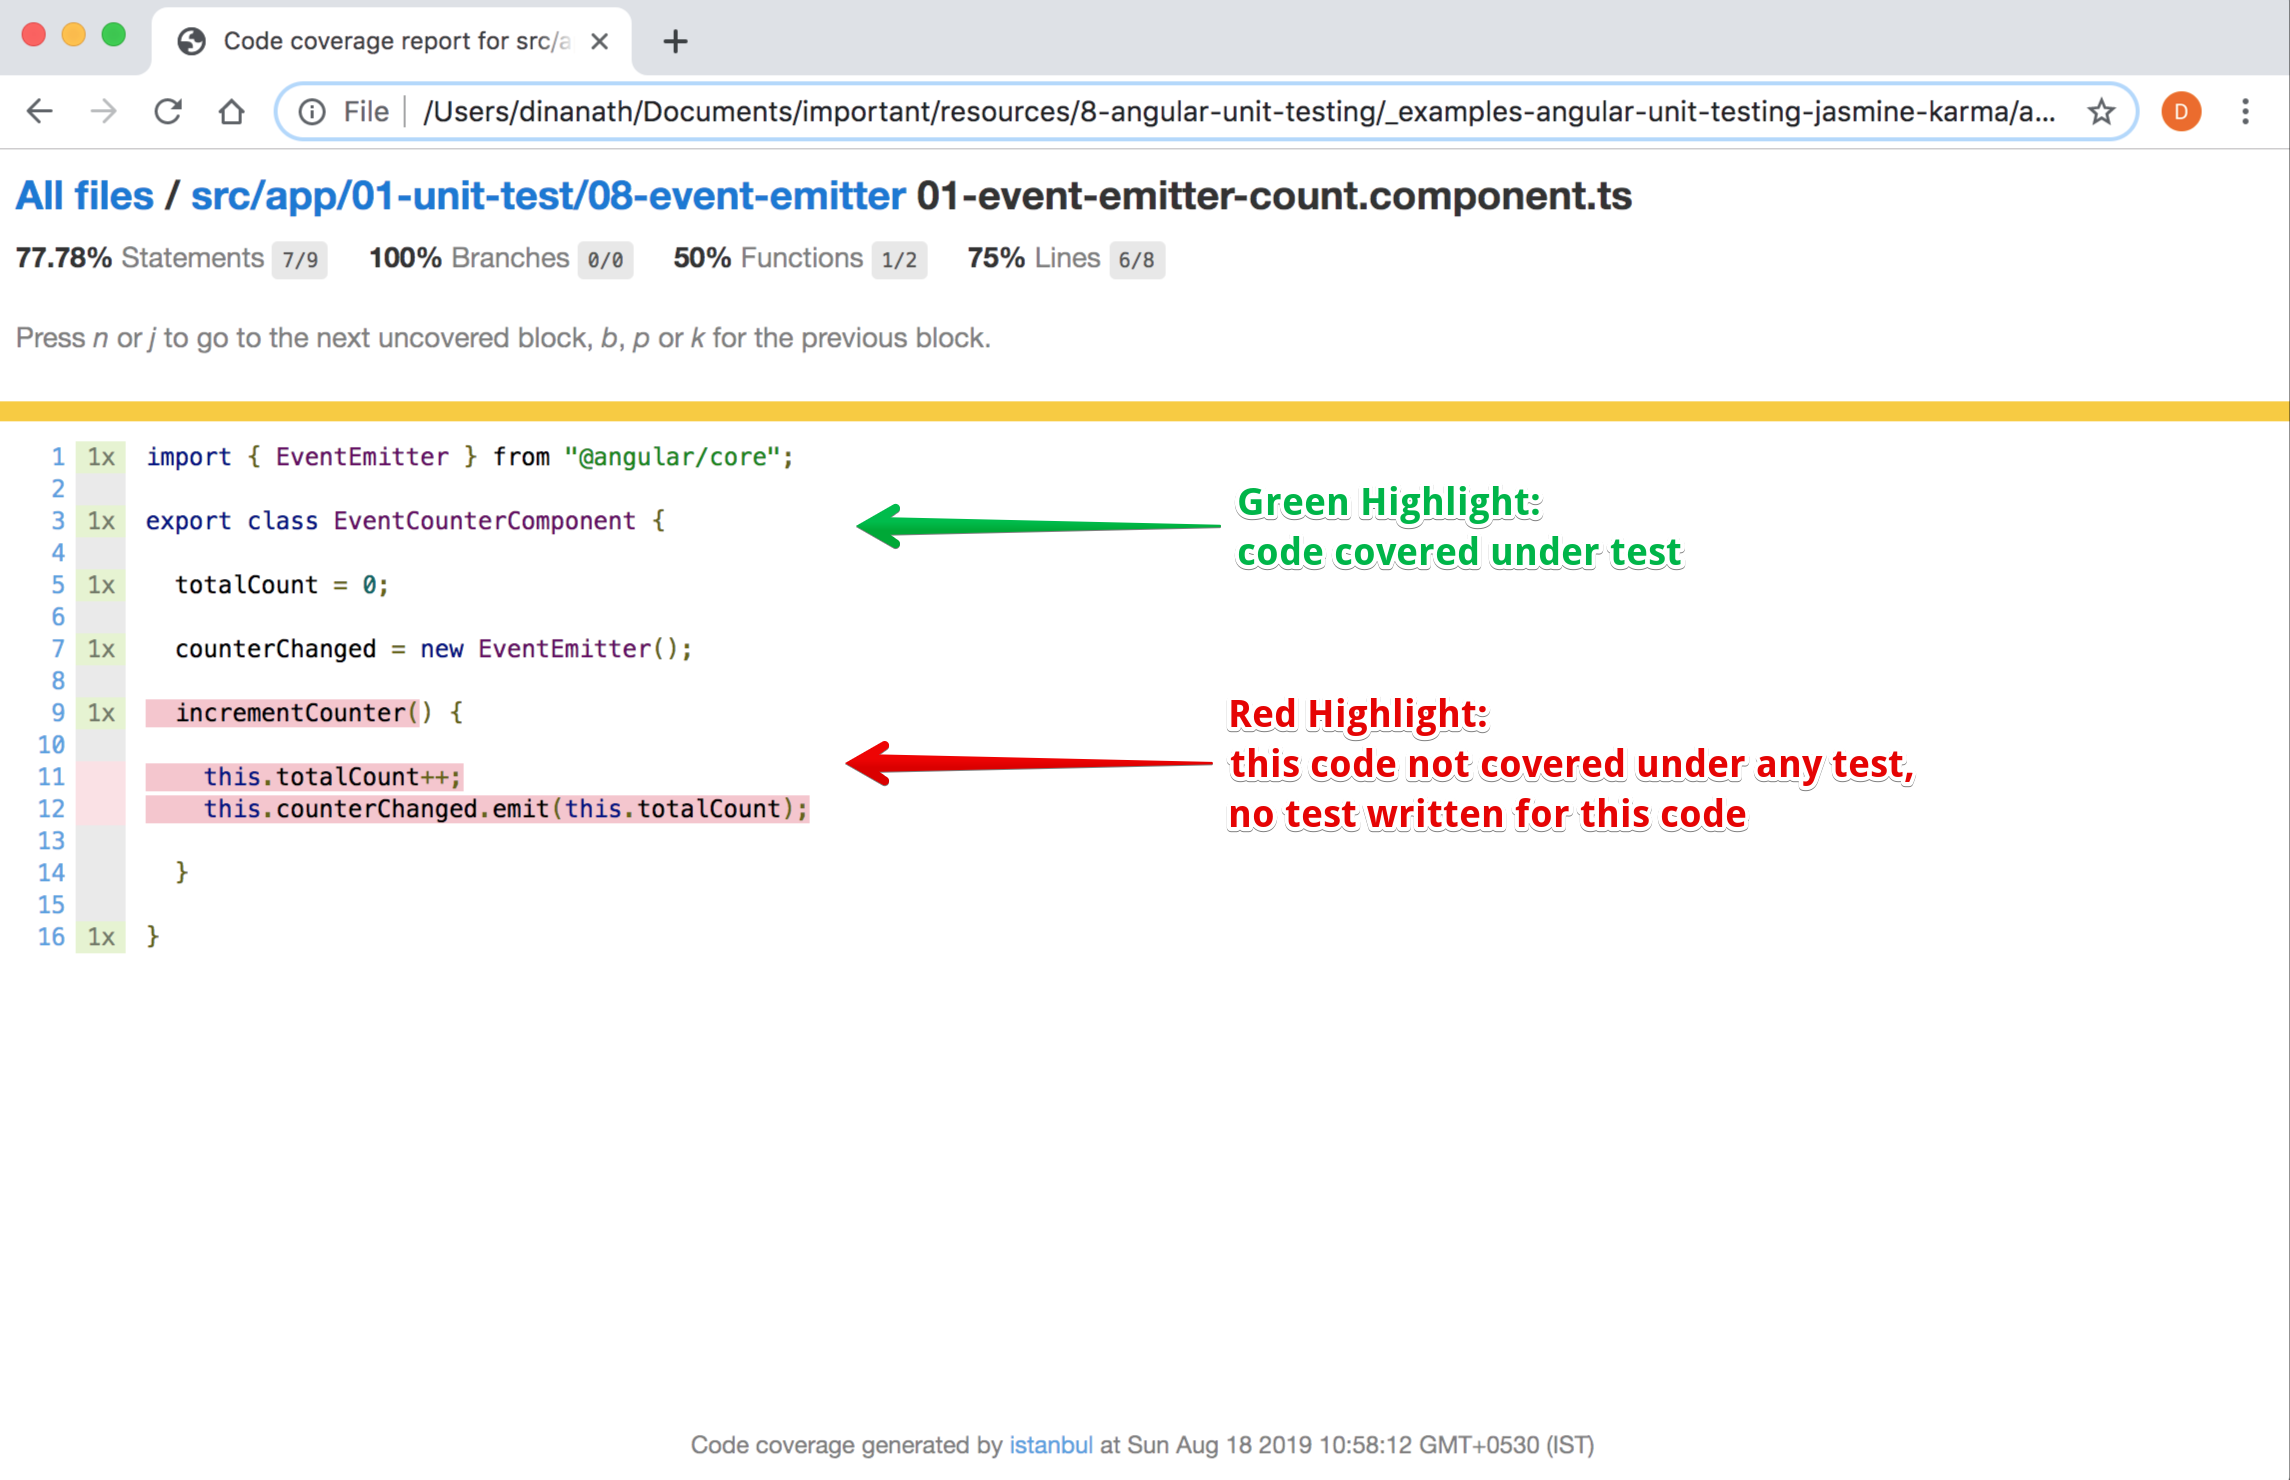 code coverage - Red Gren Highlight - Whats covered